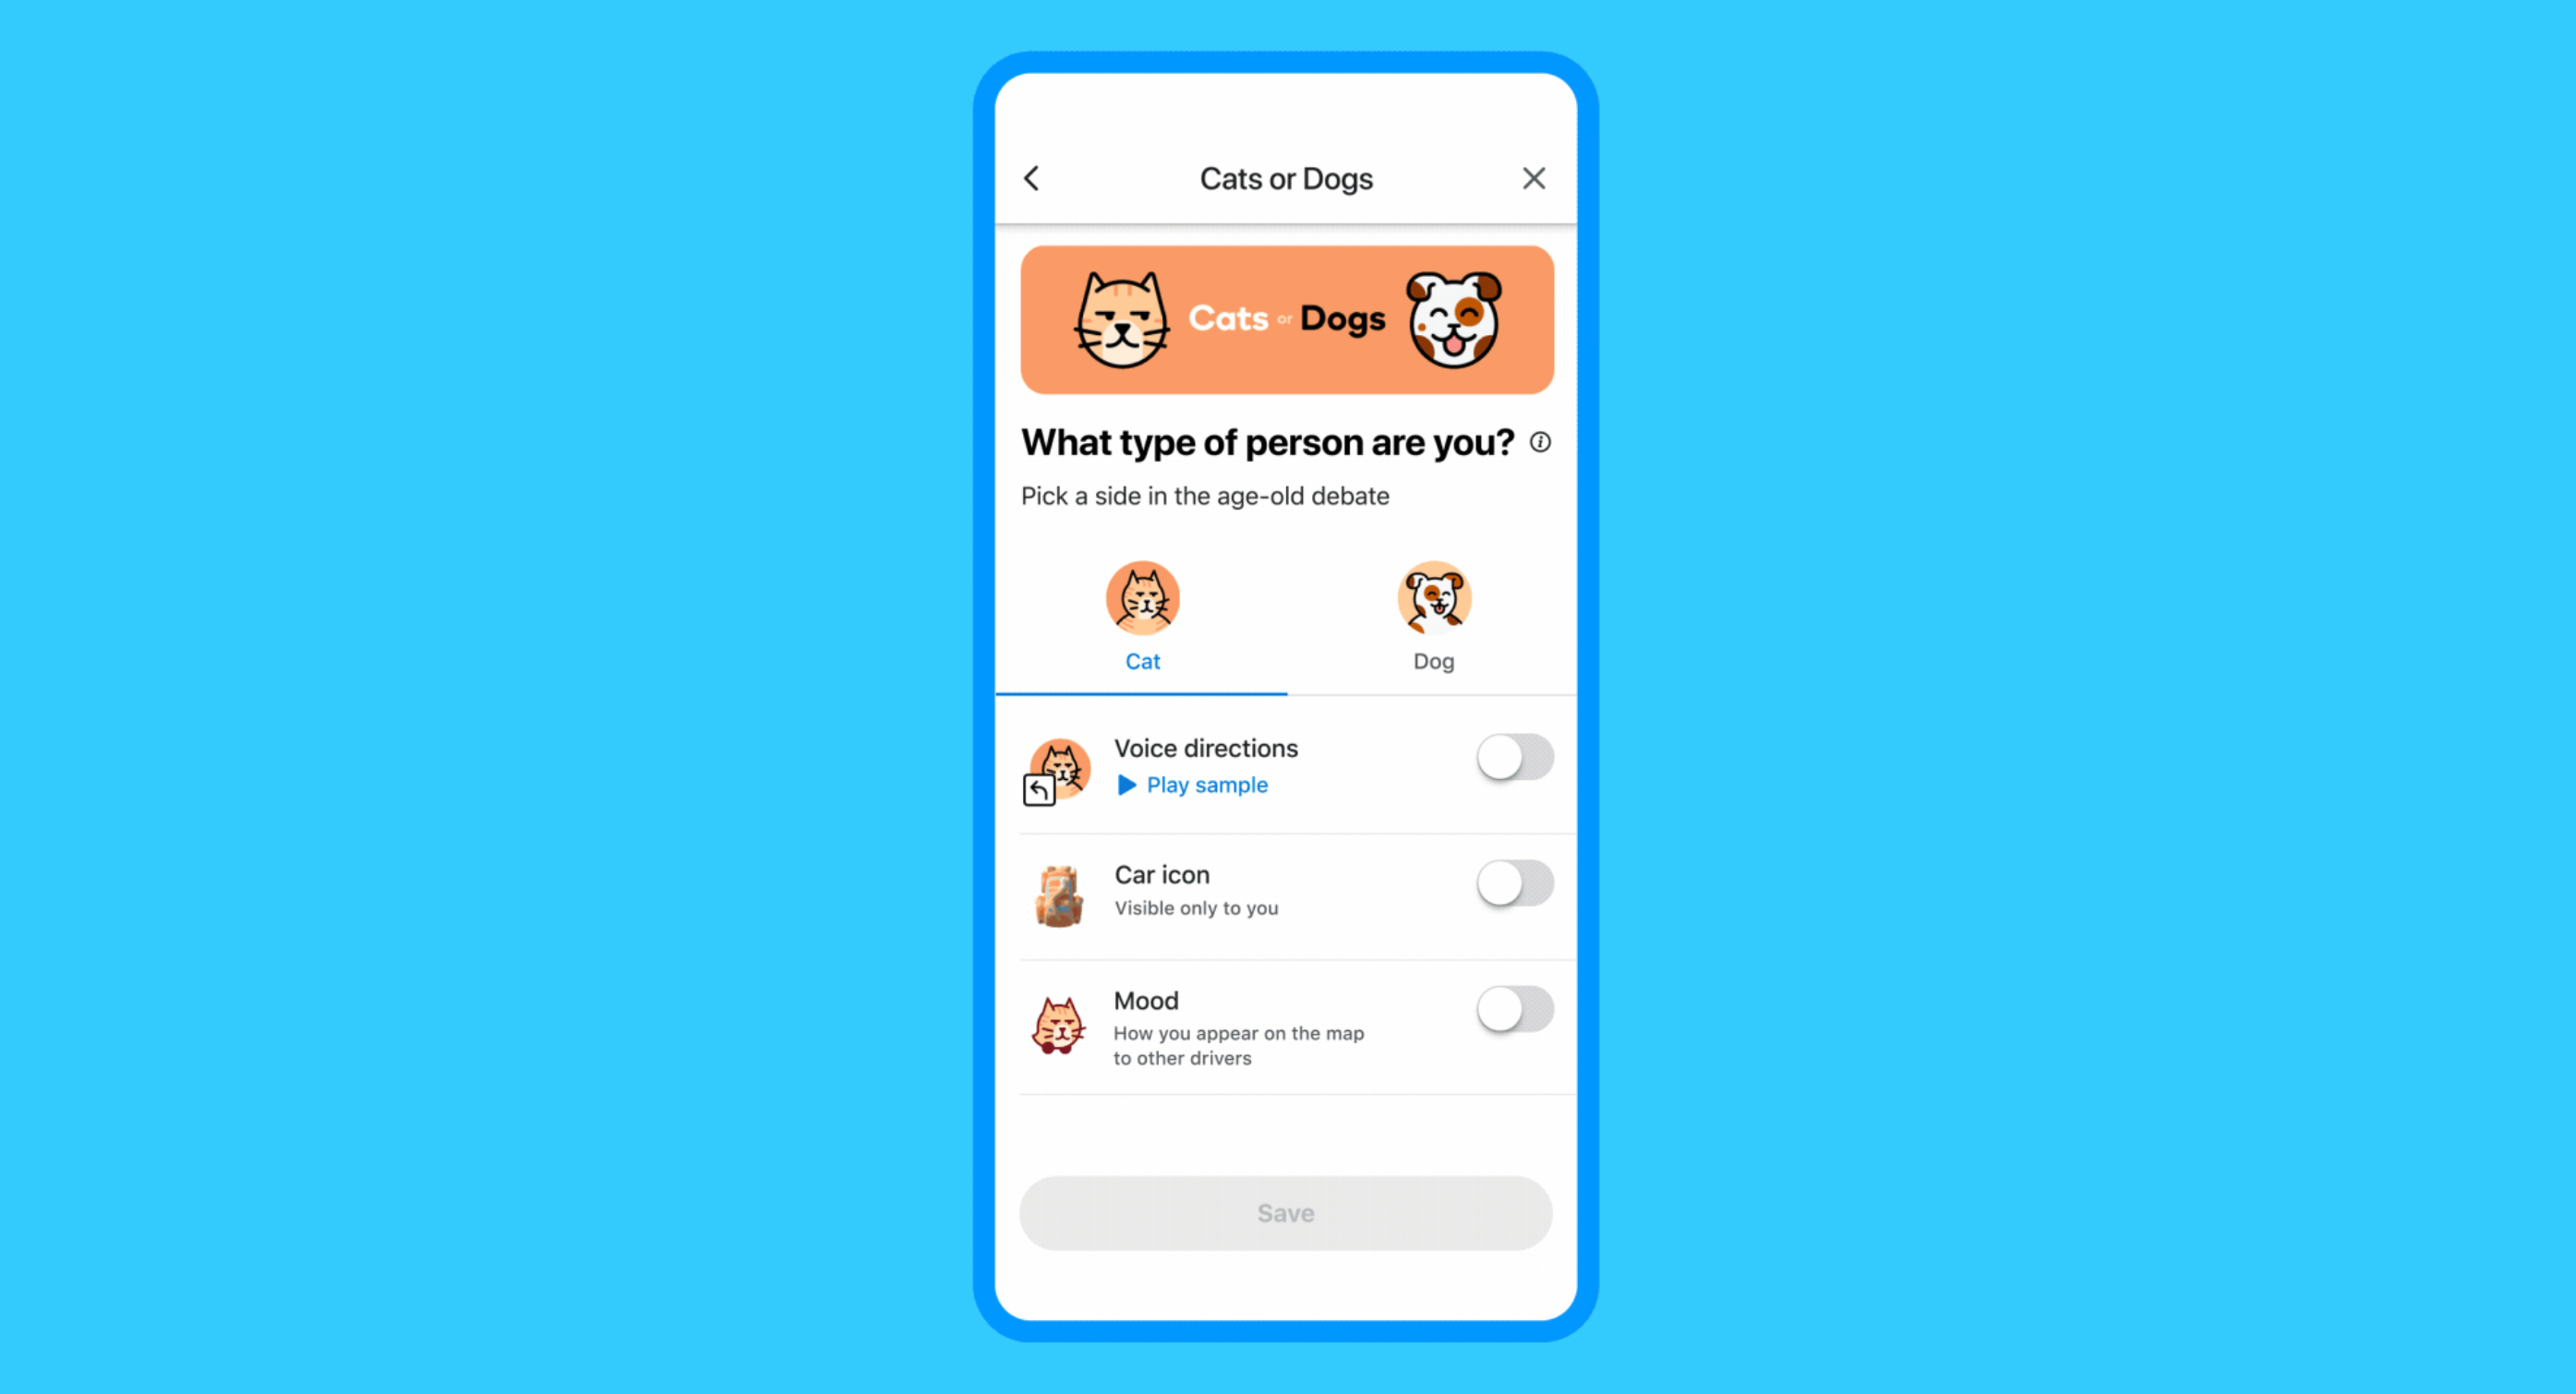 Waze Customize Your Drive Cats of Dogs theme with sounds from animals, new car icons, and mood